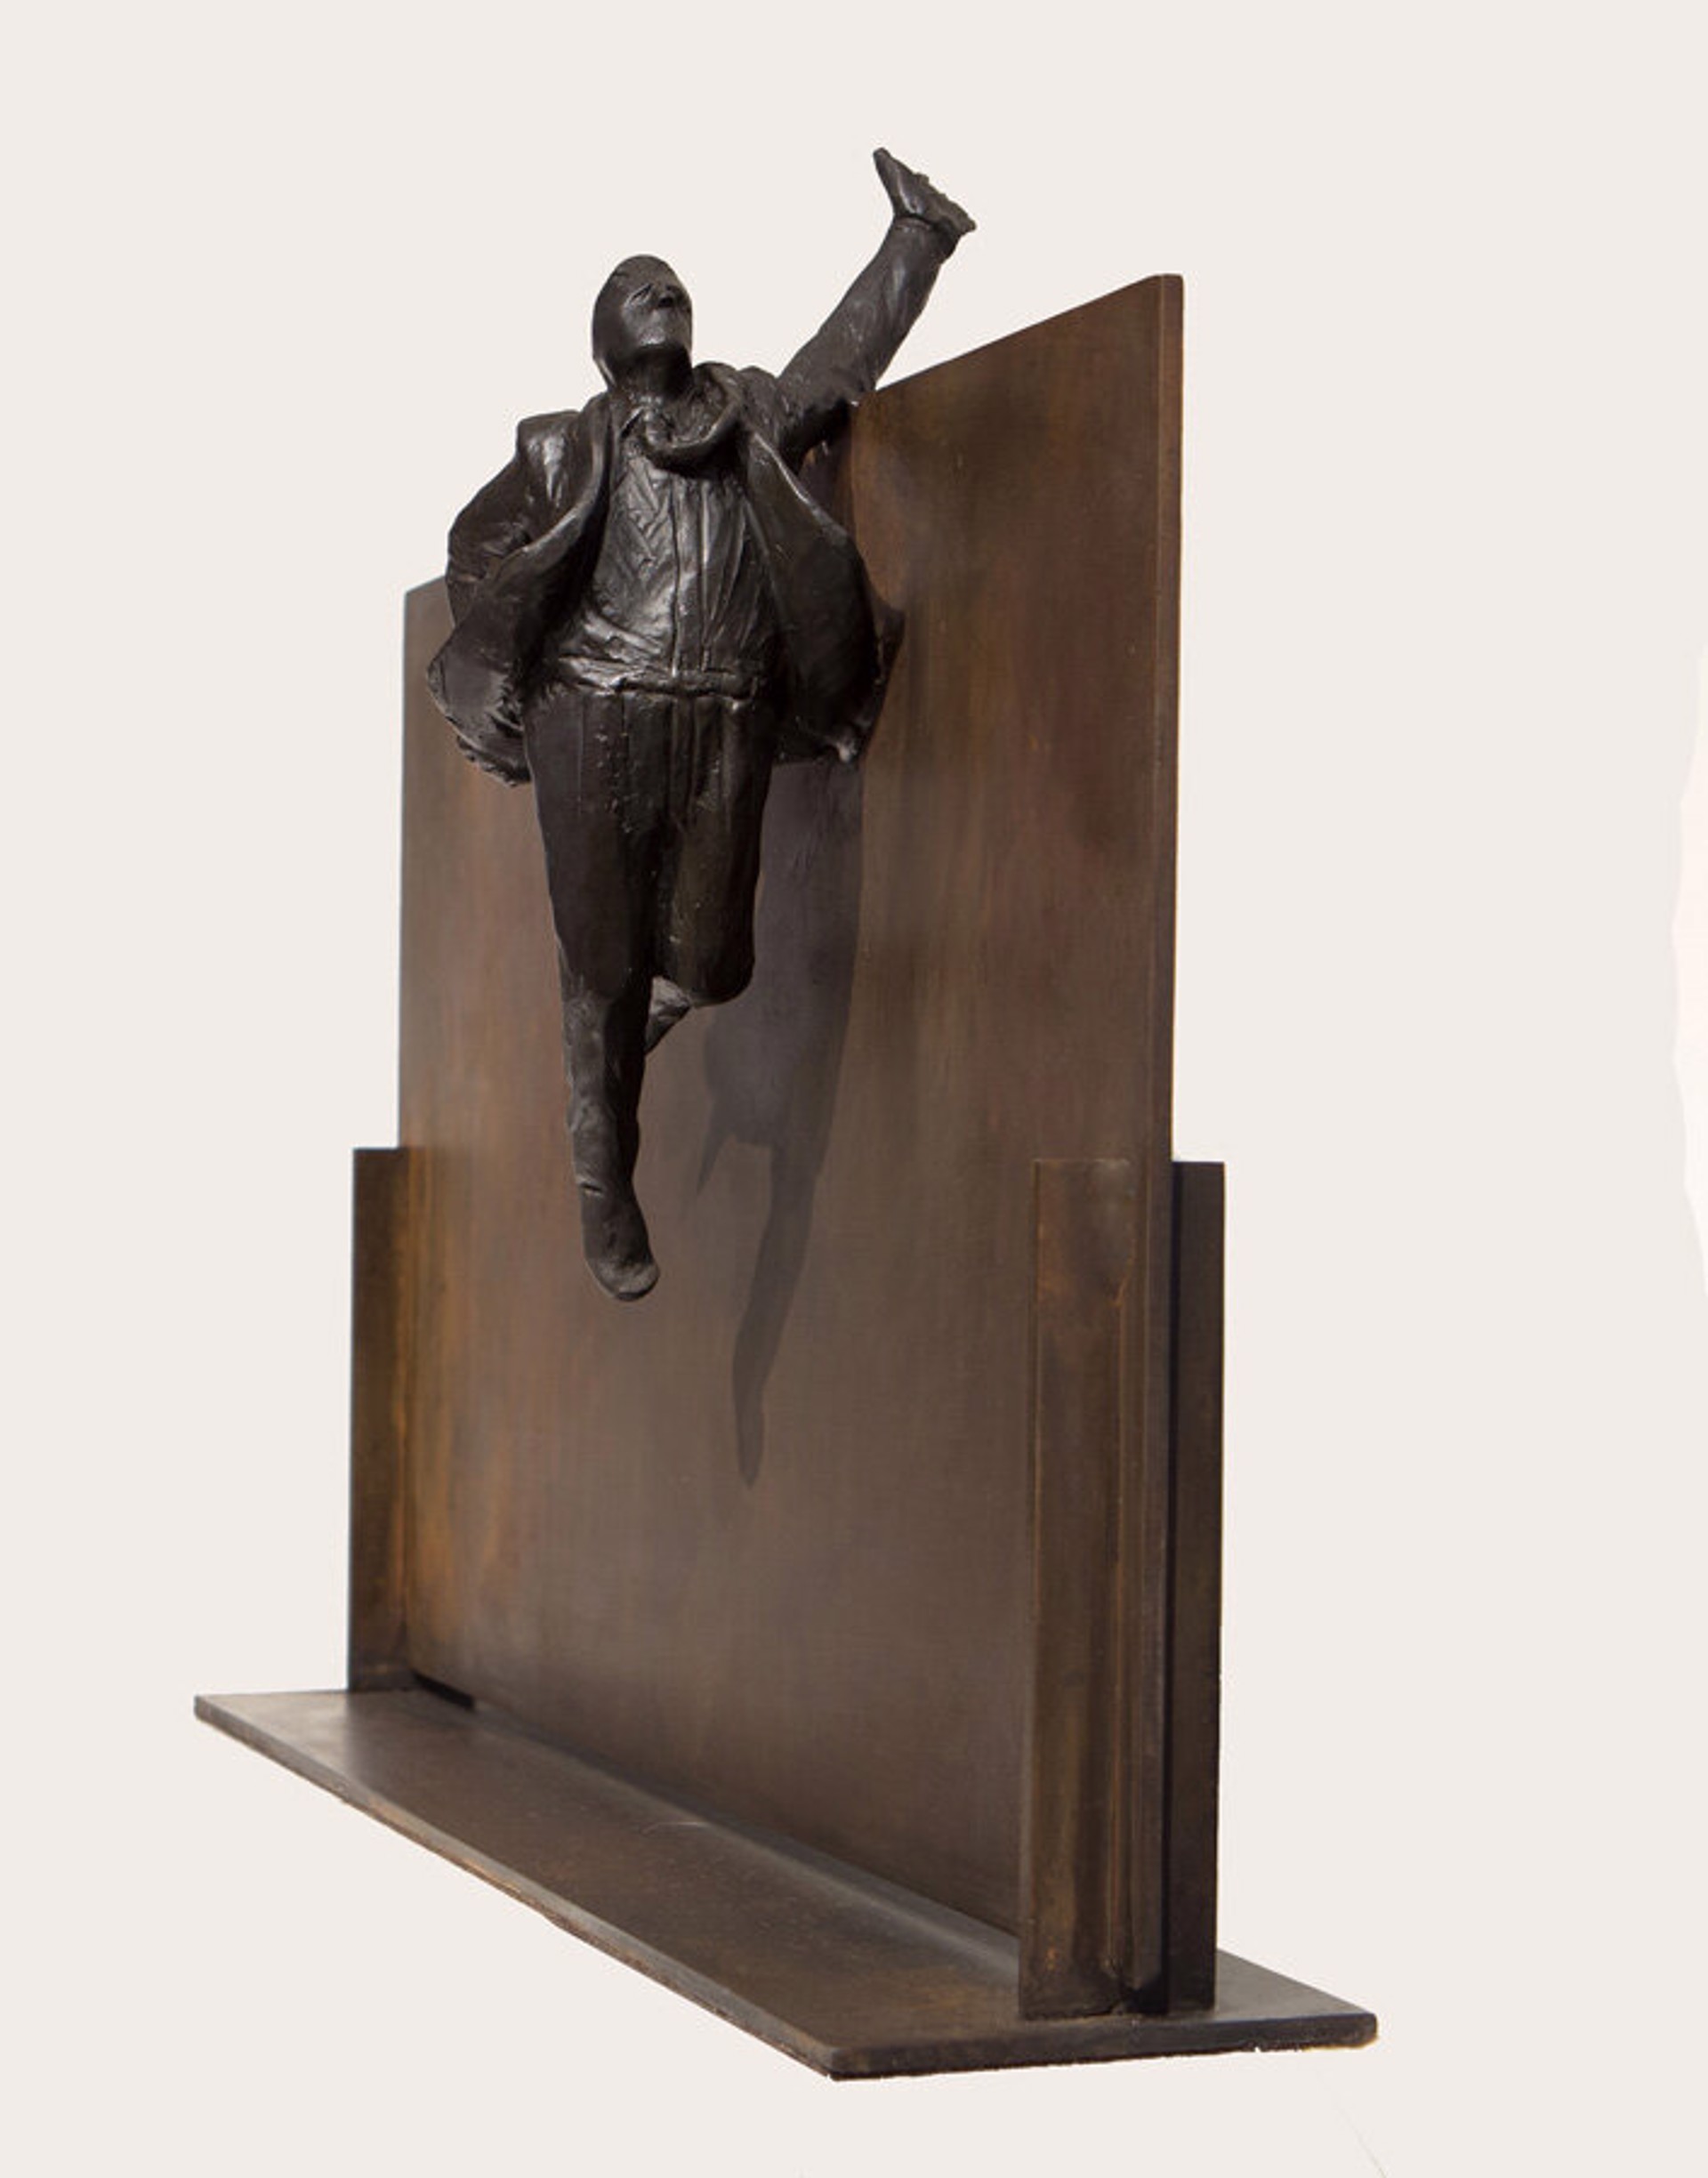 Leap of Faith, maquette (Ed. of 9) by Jim Rennert